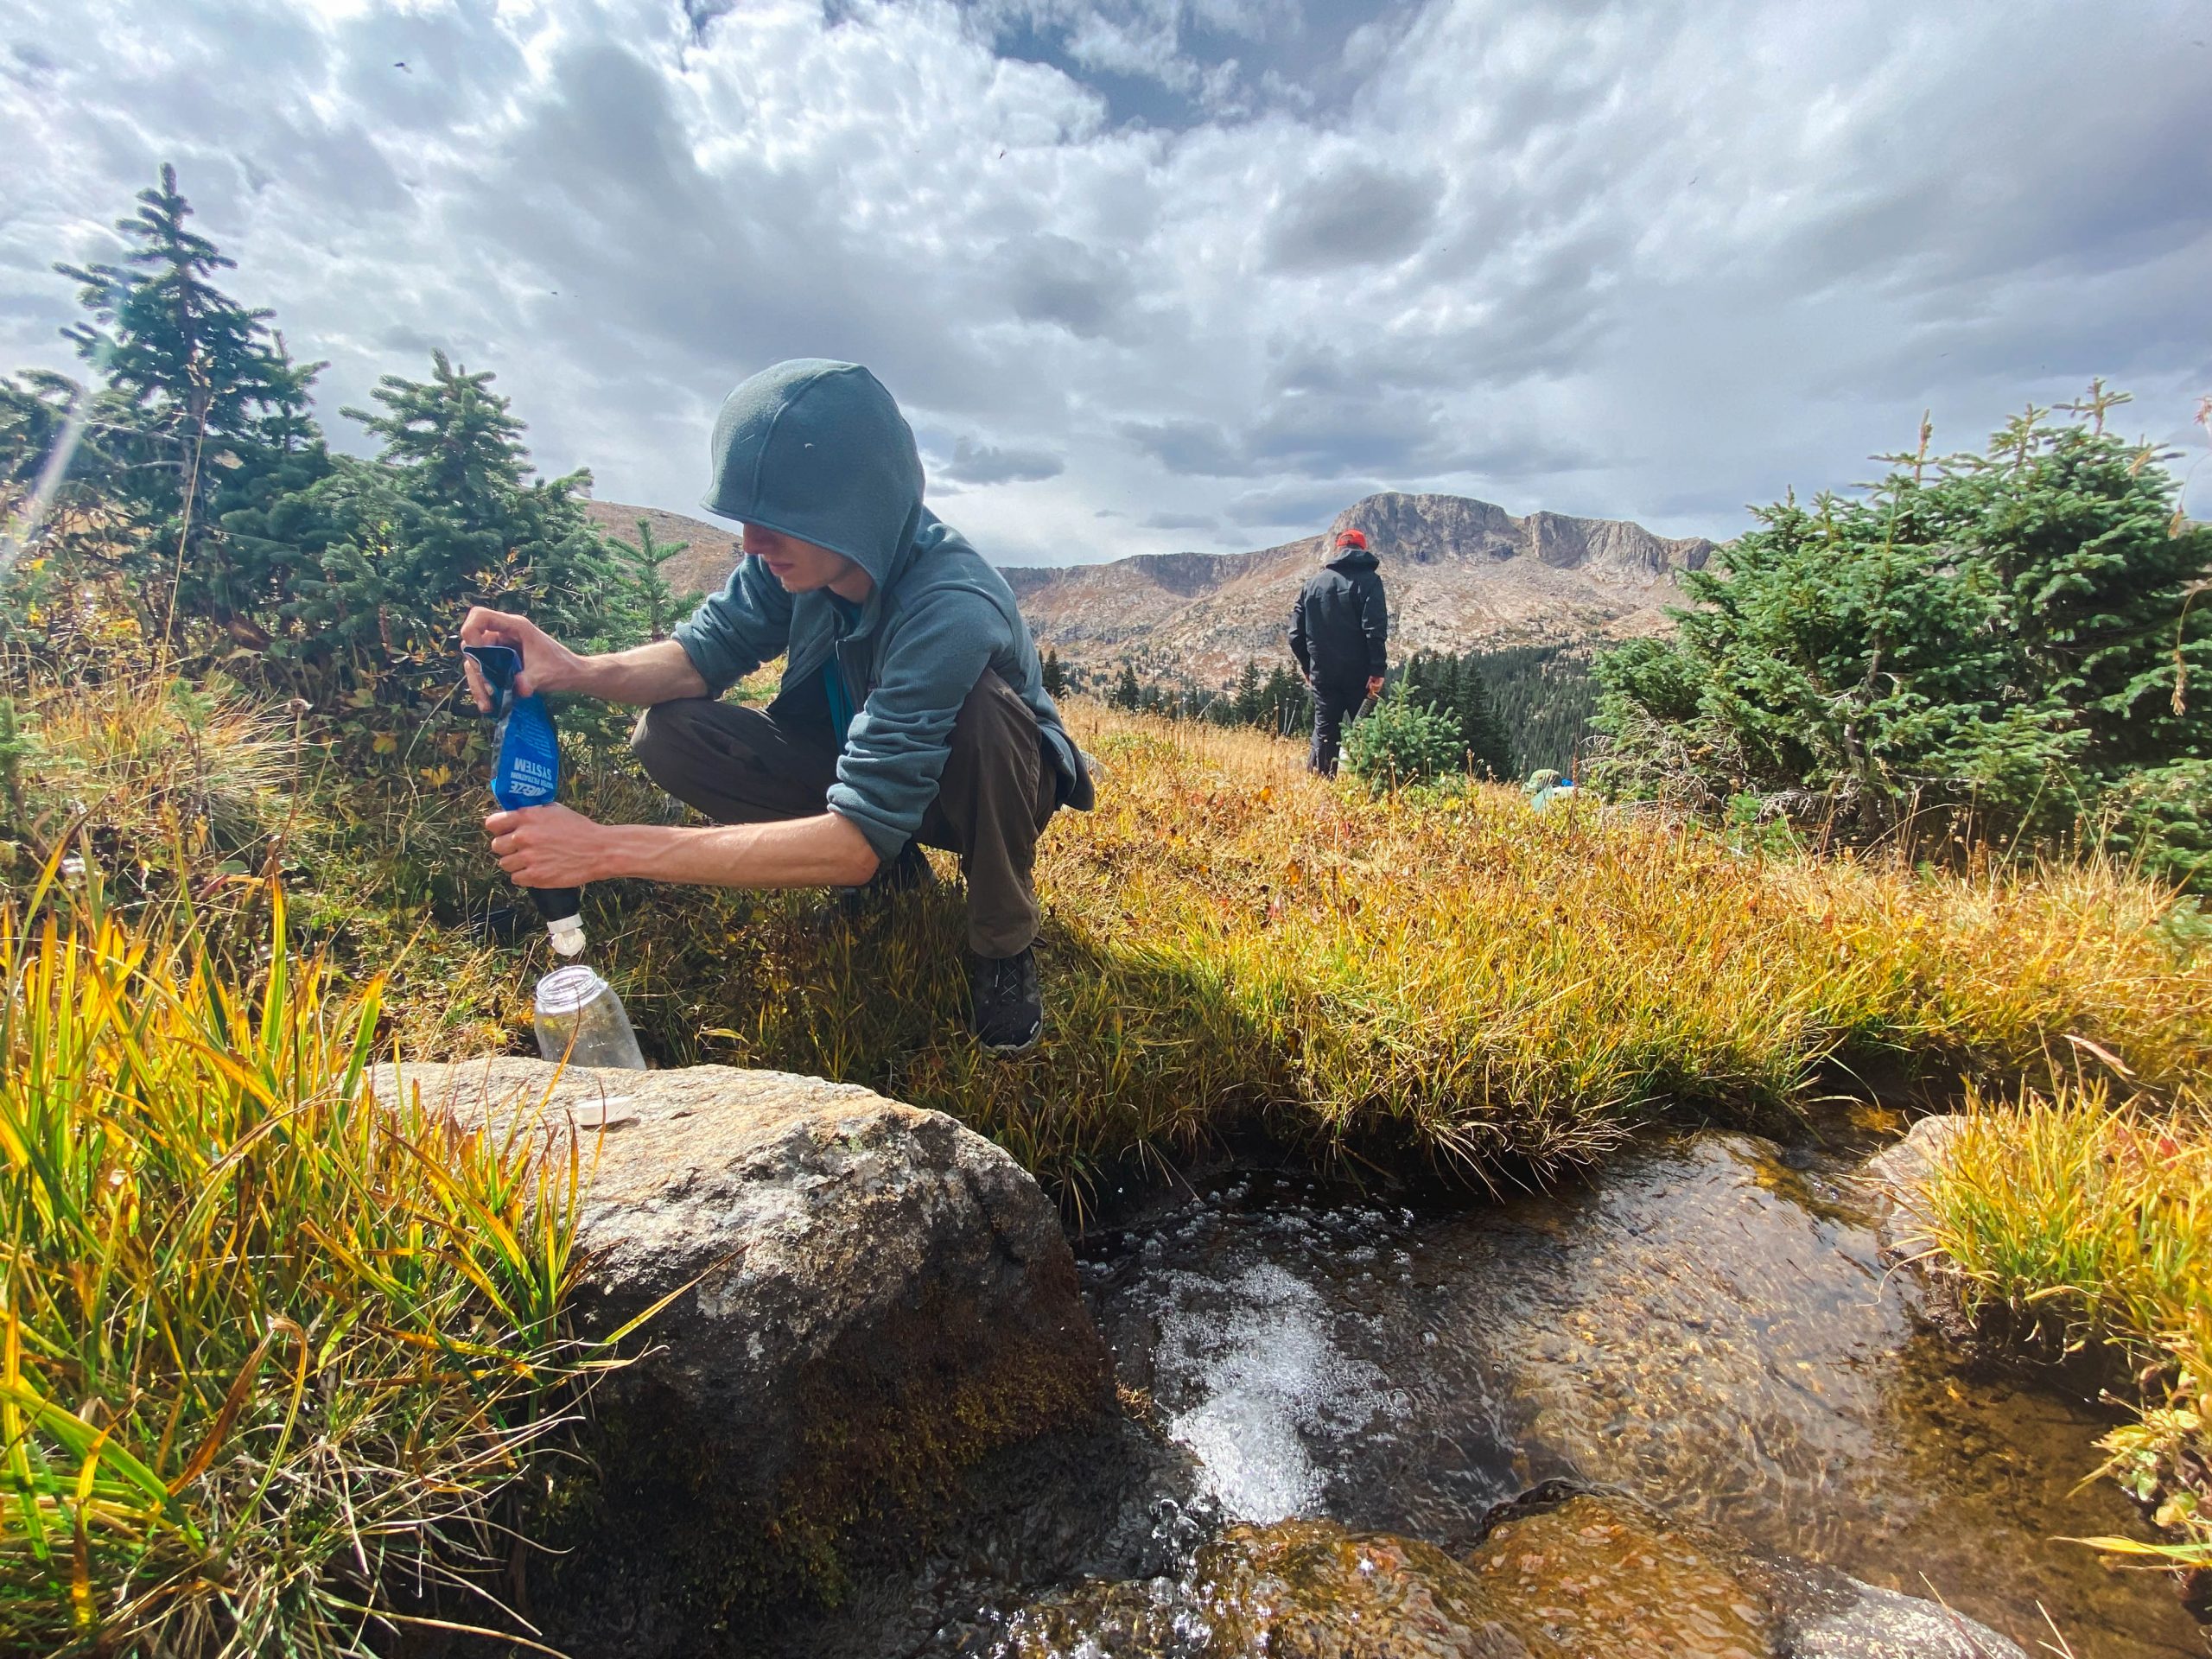 An individual fills up water from a river as they prioritize self-care in the outdoors.